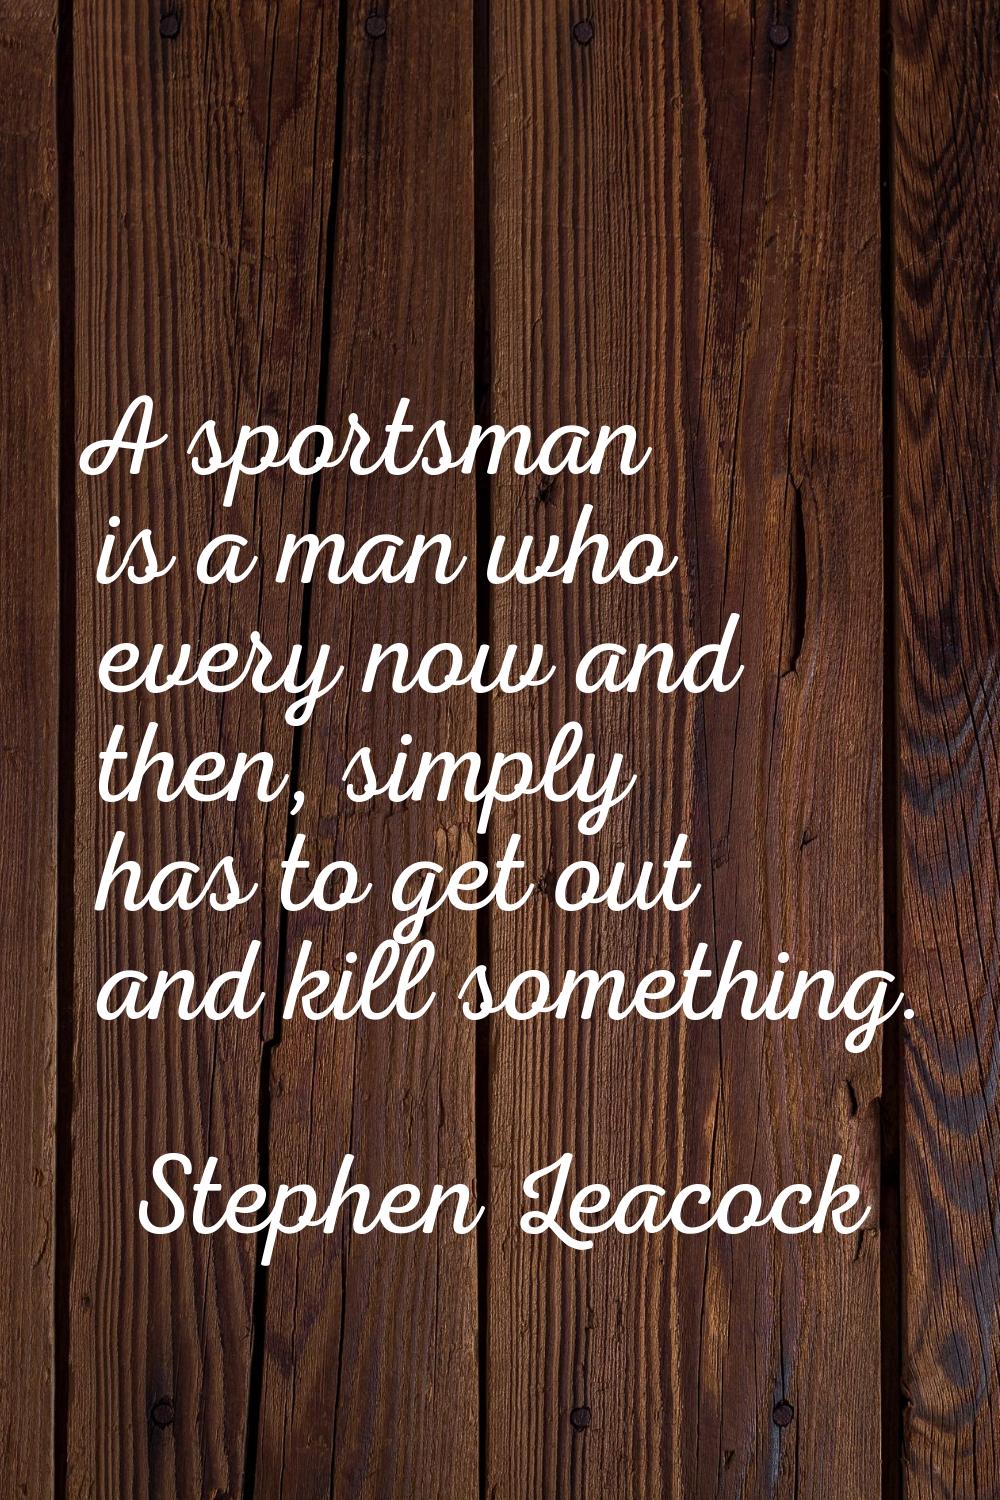 A sportsman is a man who every now and then, simply has to get out and kill something.